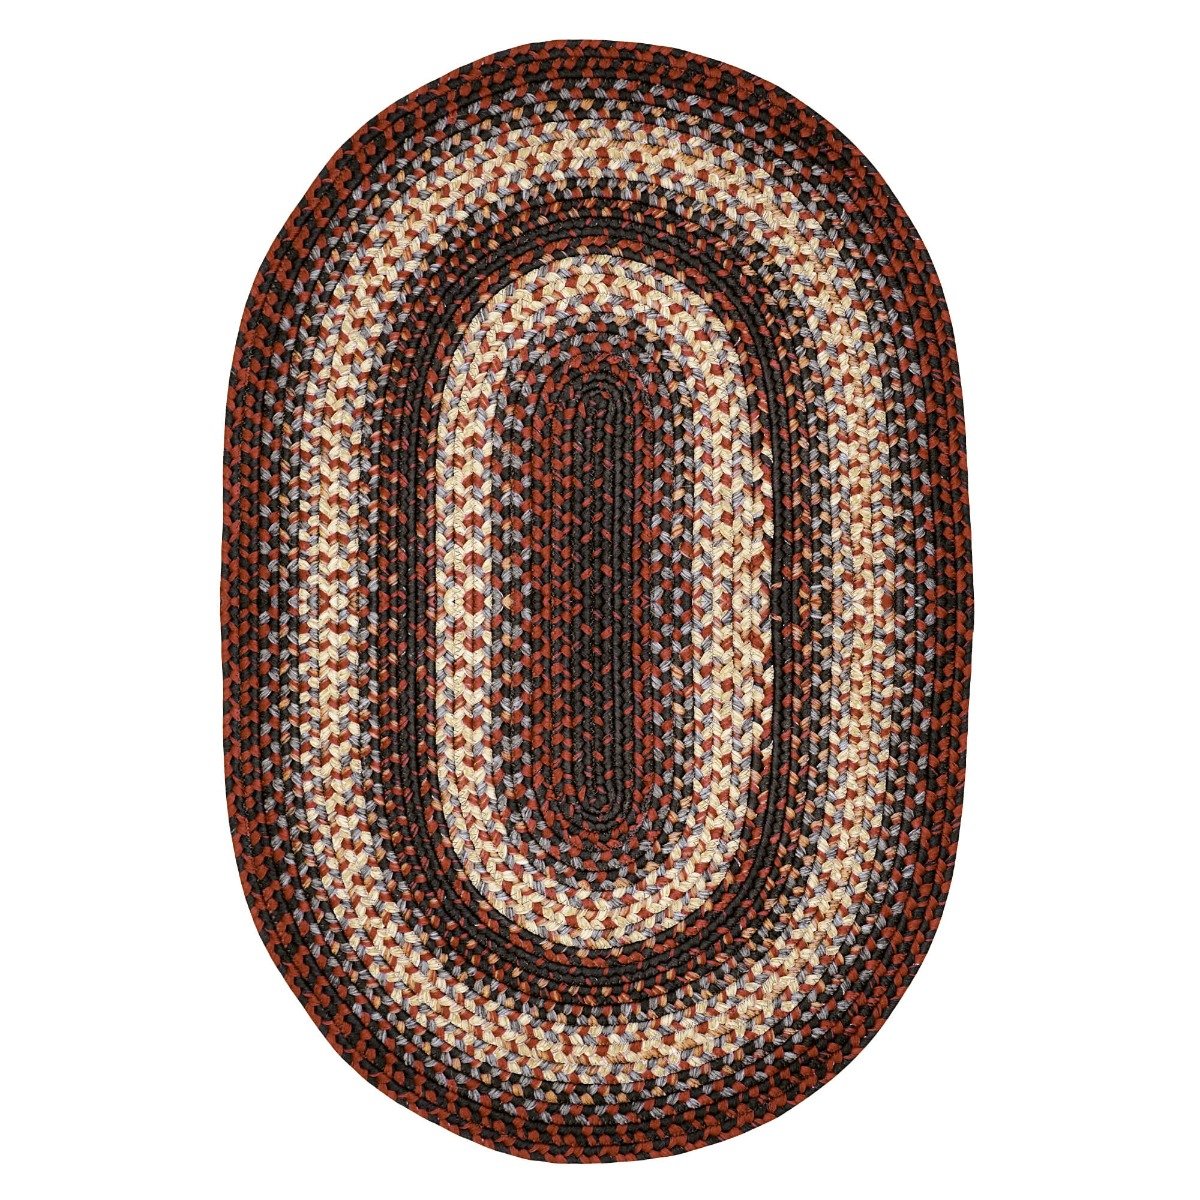 Rainforest Multi Color Ultra Durable Braided Oval Rugs